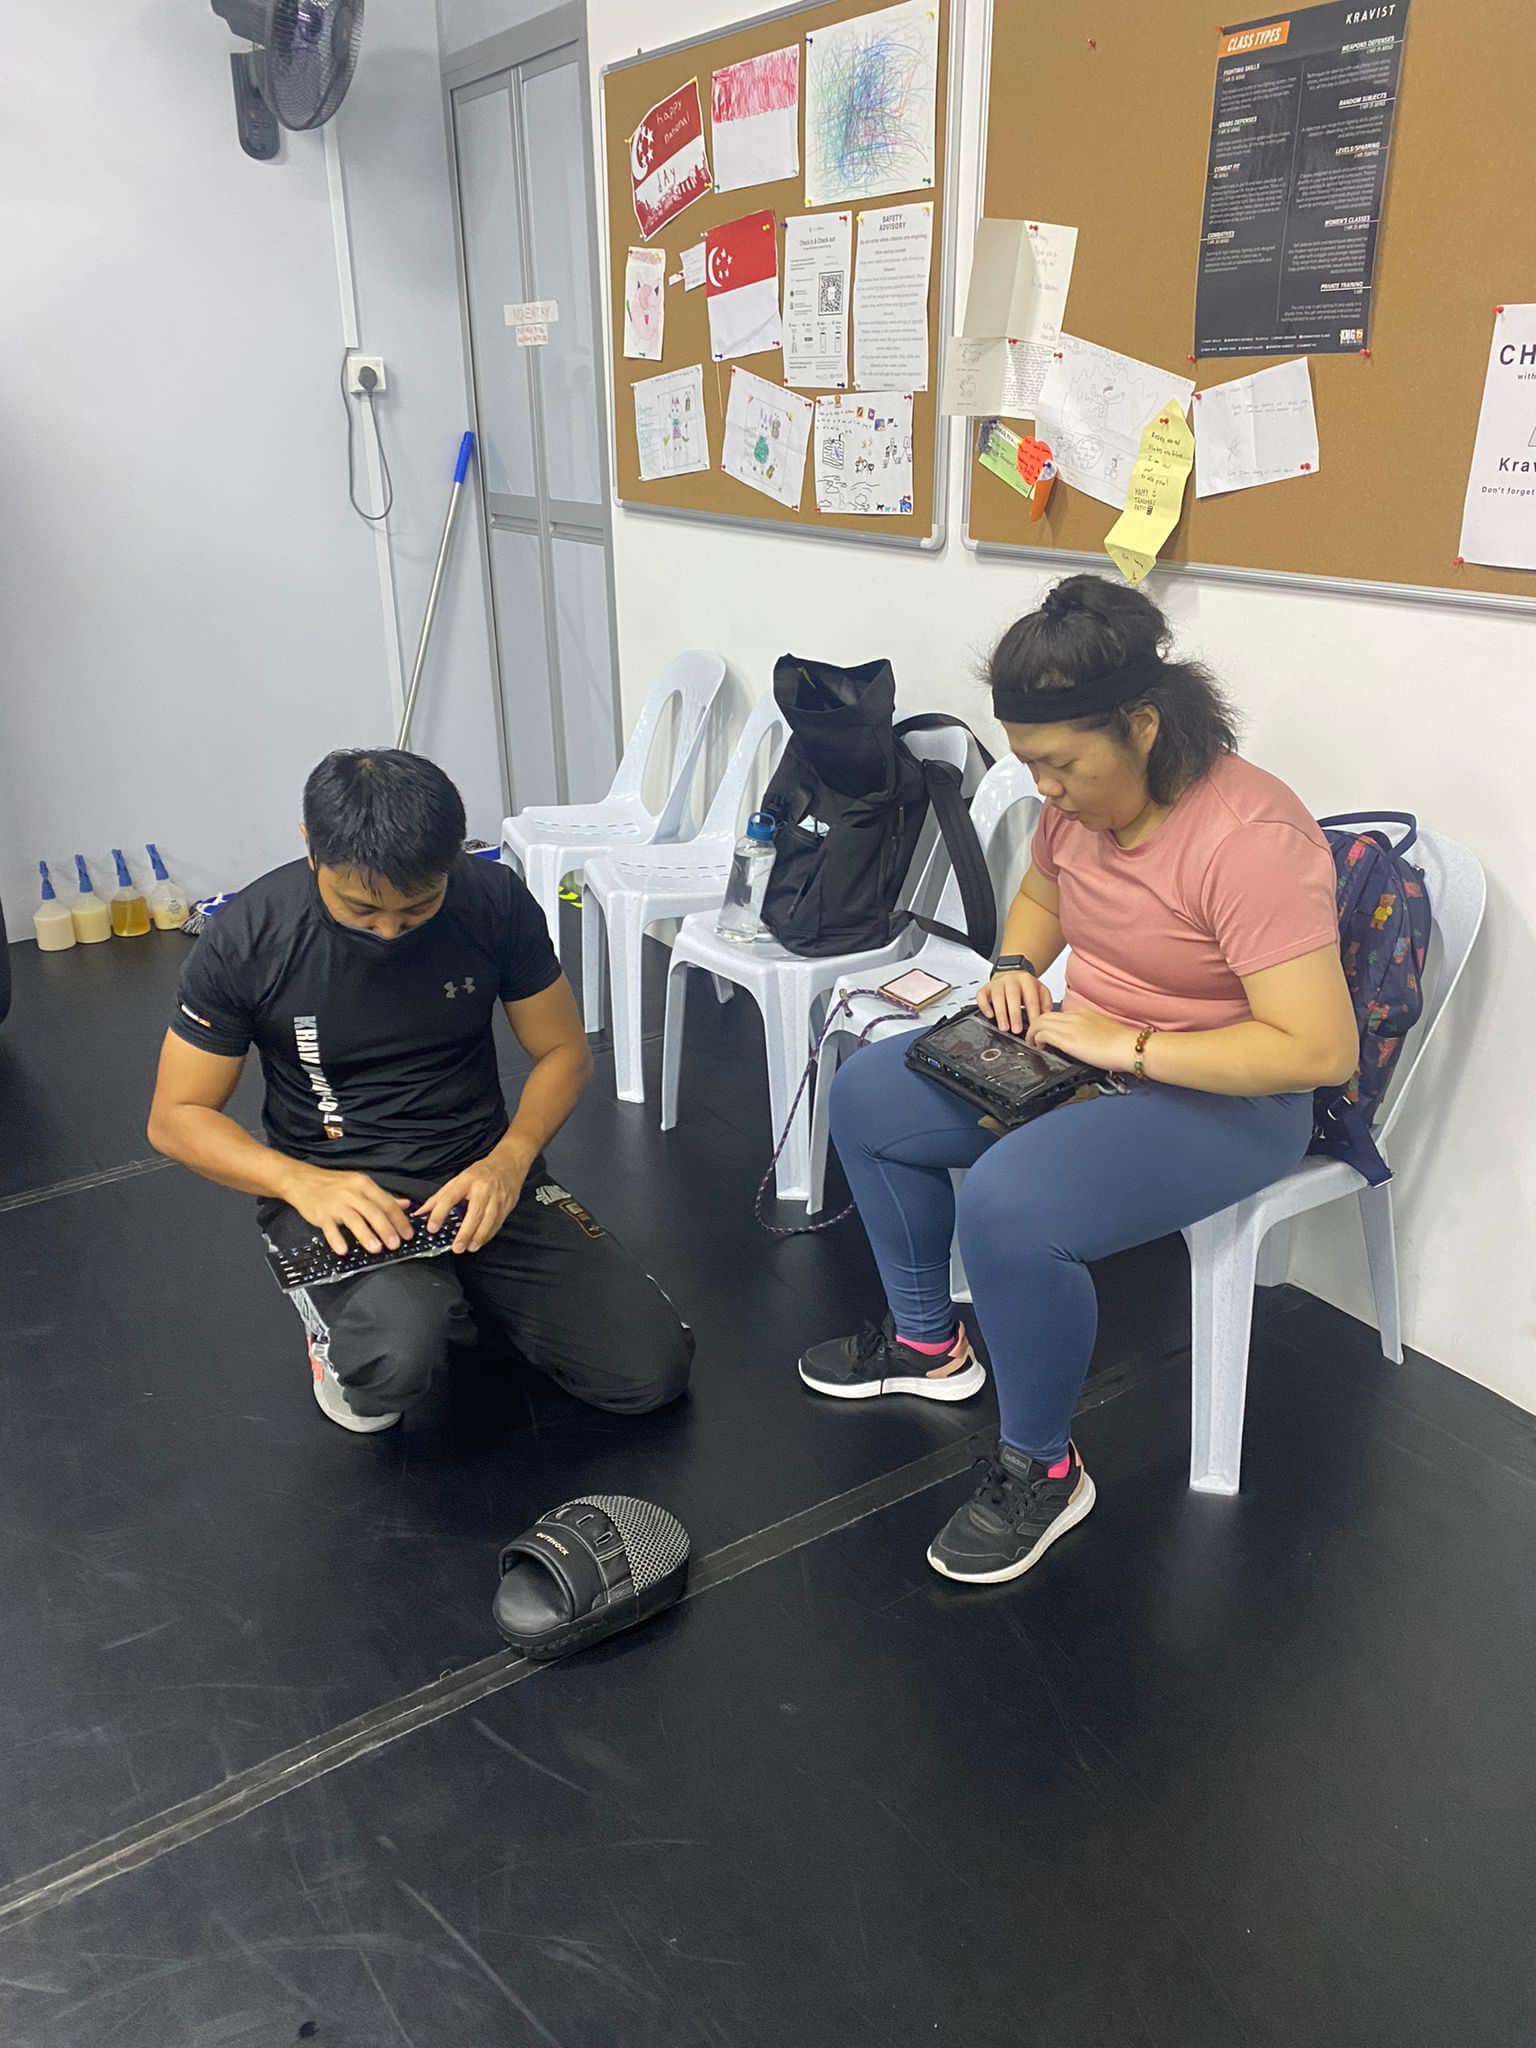 Siew Ling’s trainer is typing while kneeling on the floor, while Siew Ling sits beside him on a chair to read what he shares